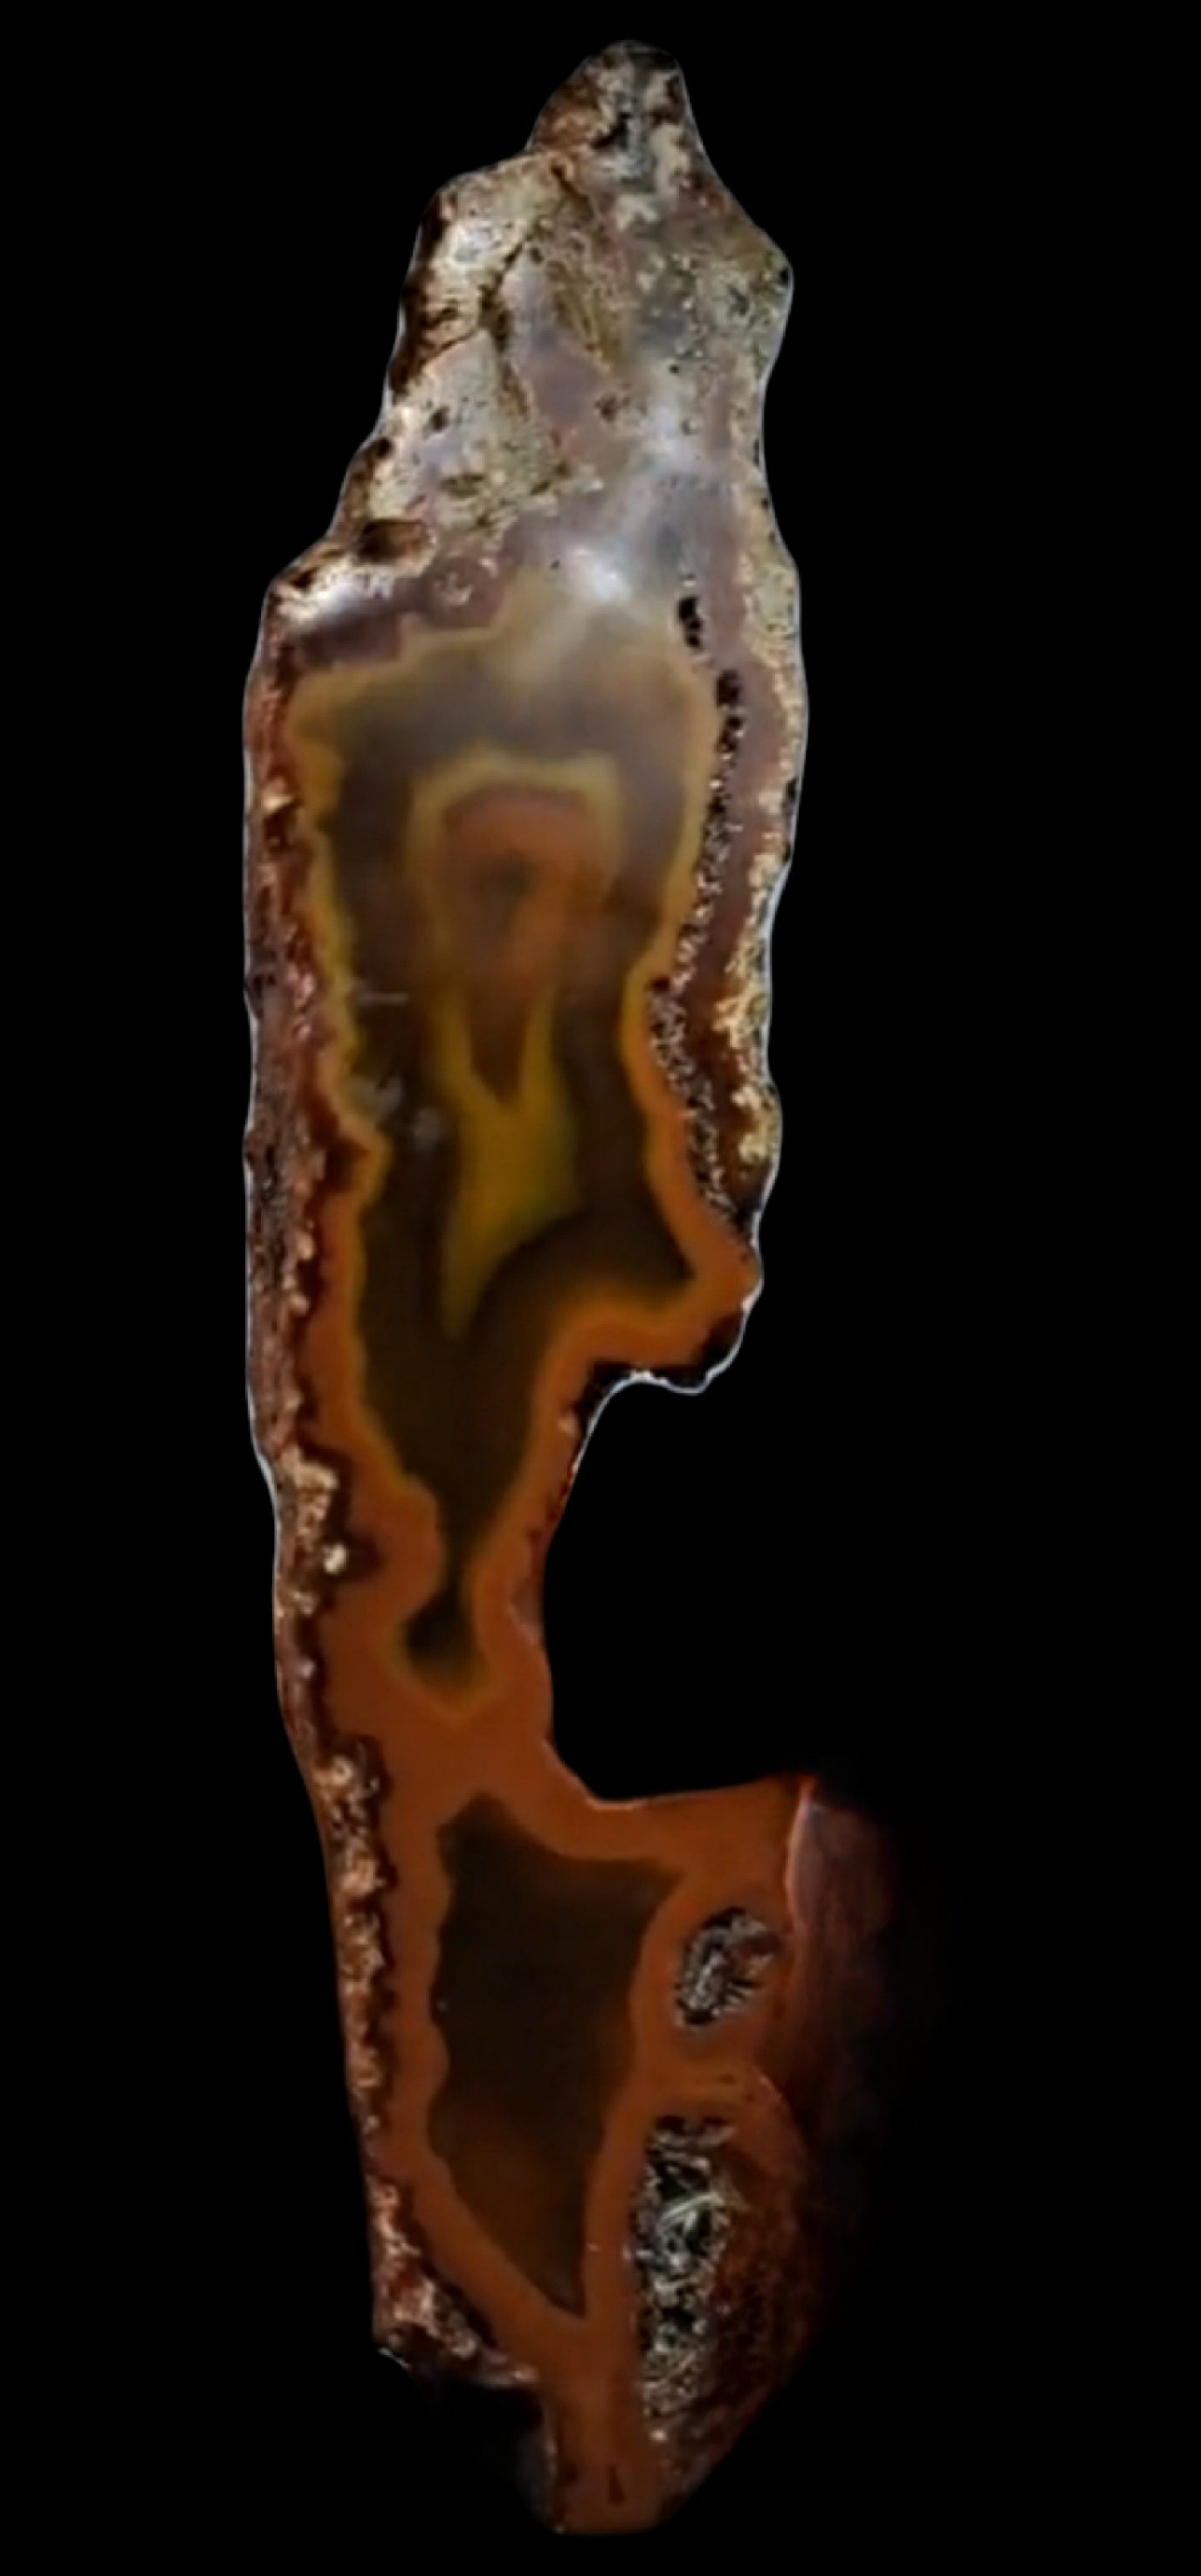 Sister Agates - Matching Pair from Geode Sliced in Half